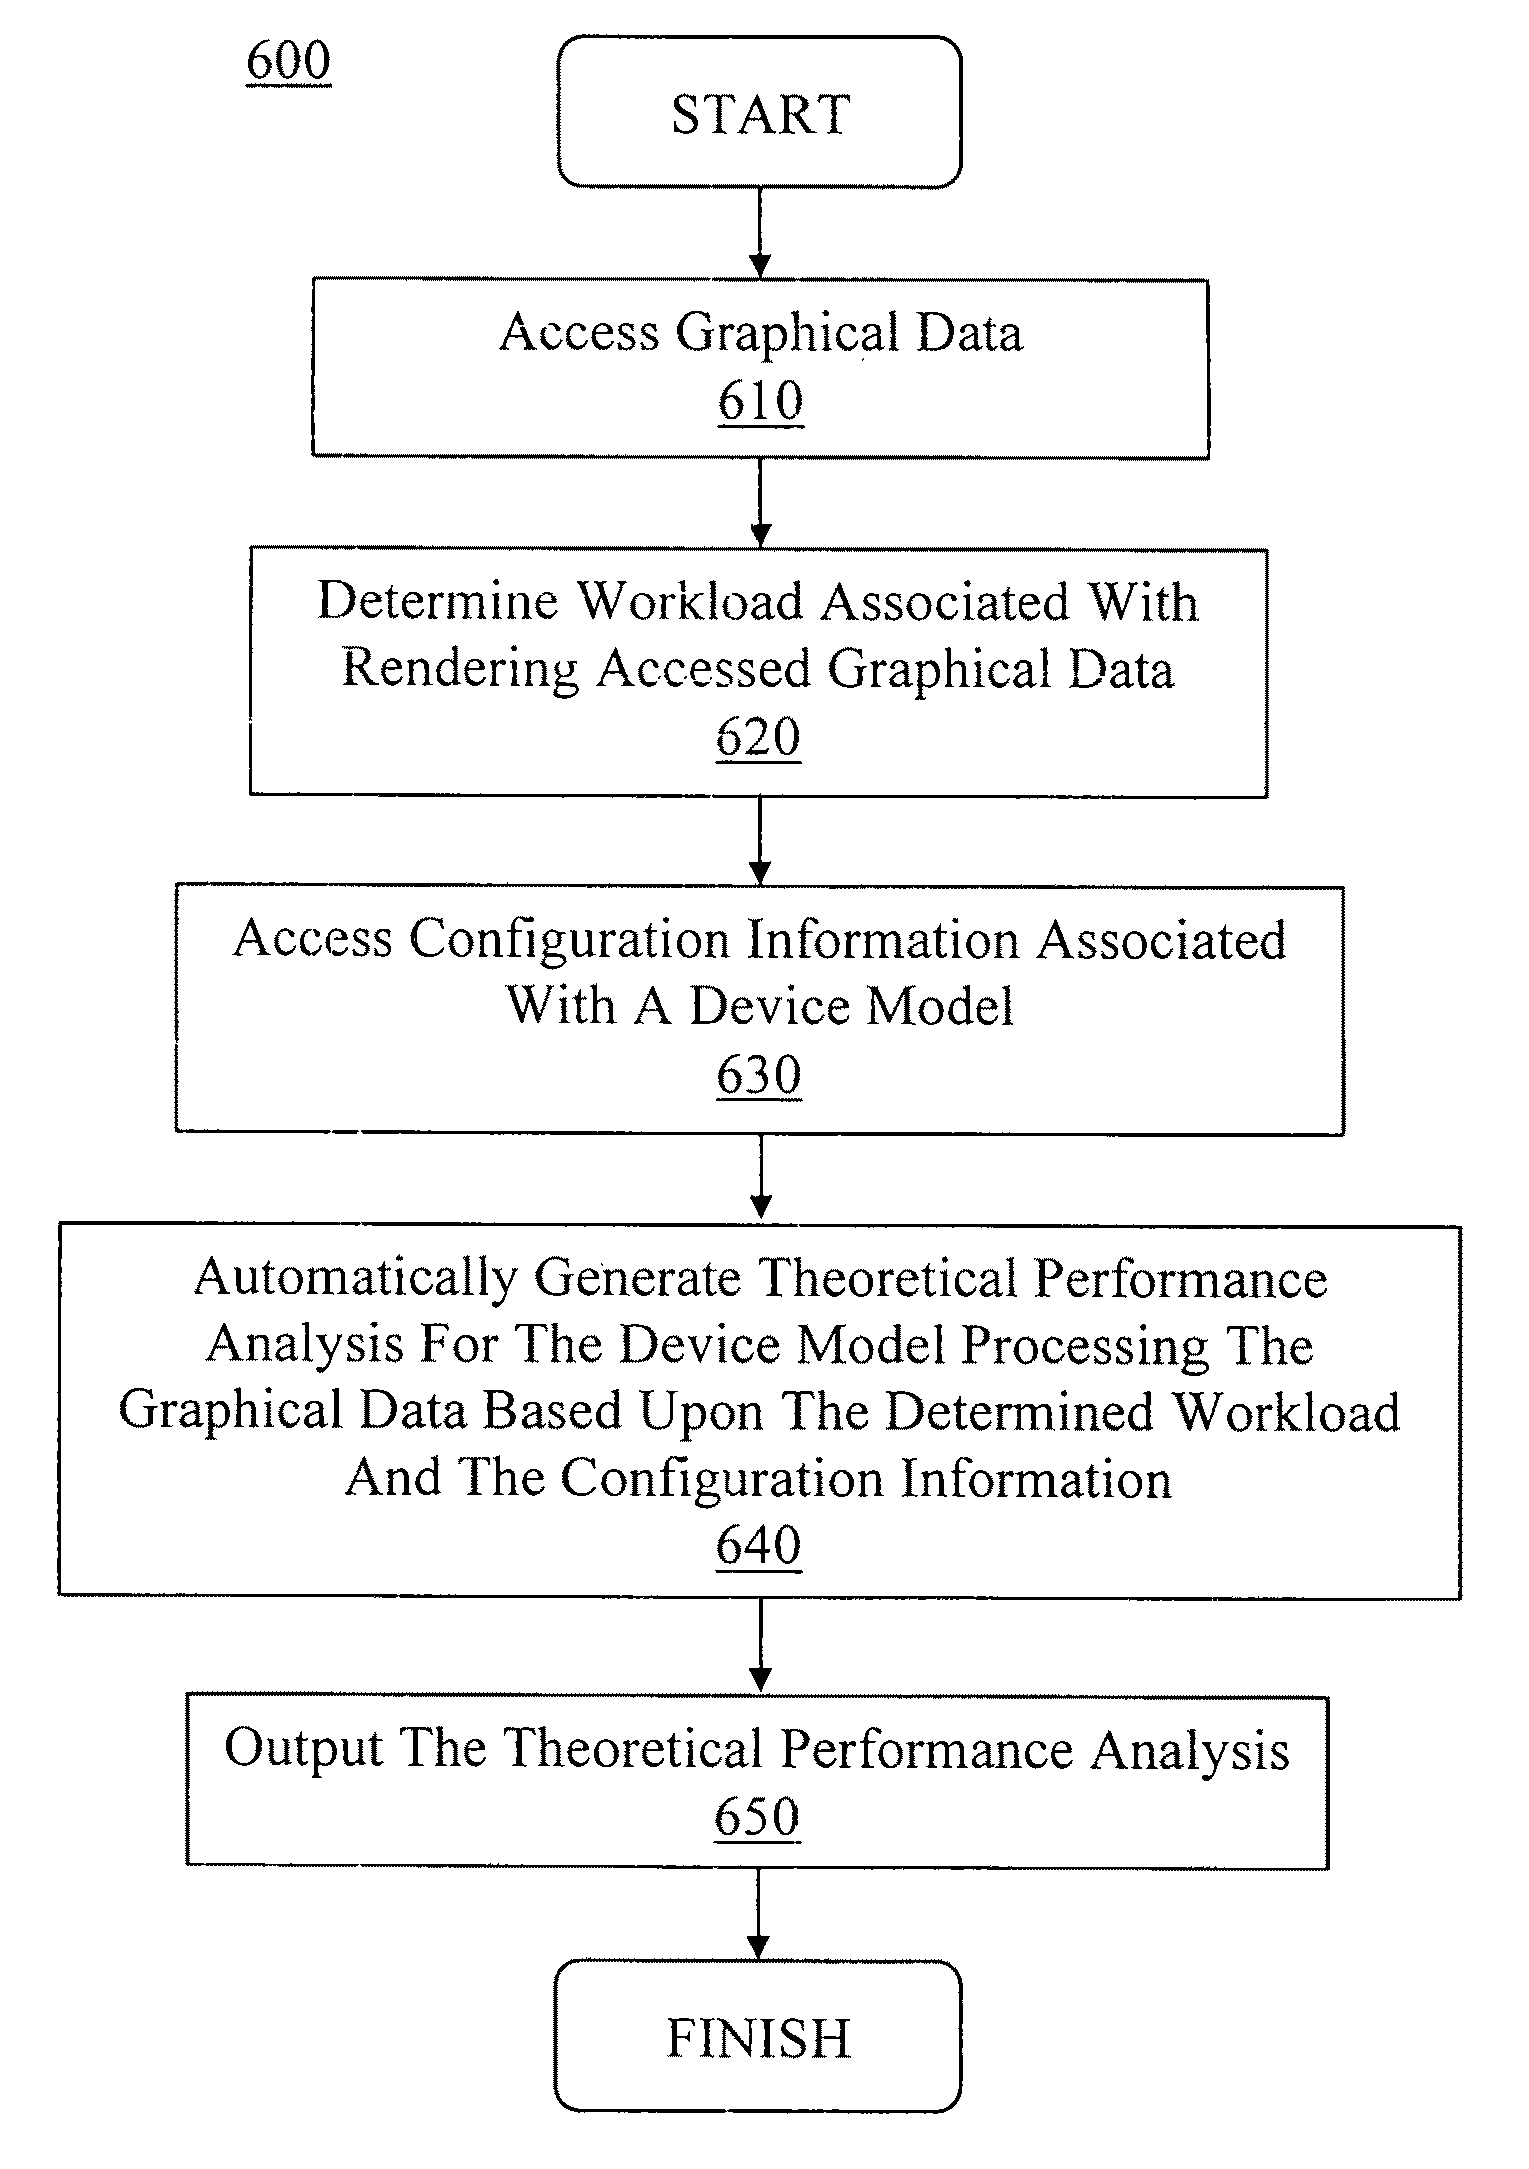 Automated generation of theoretical performance analysis based upon workload and design configuration